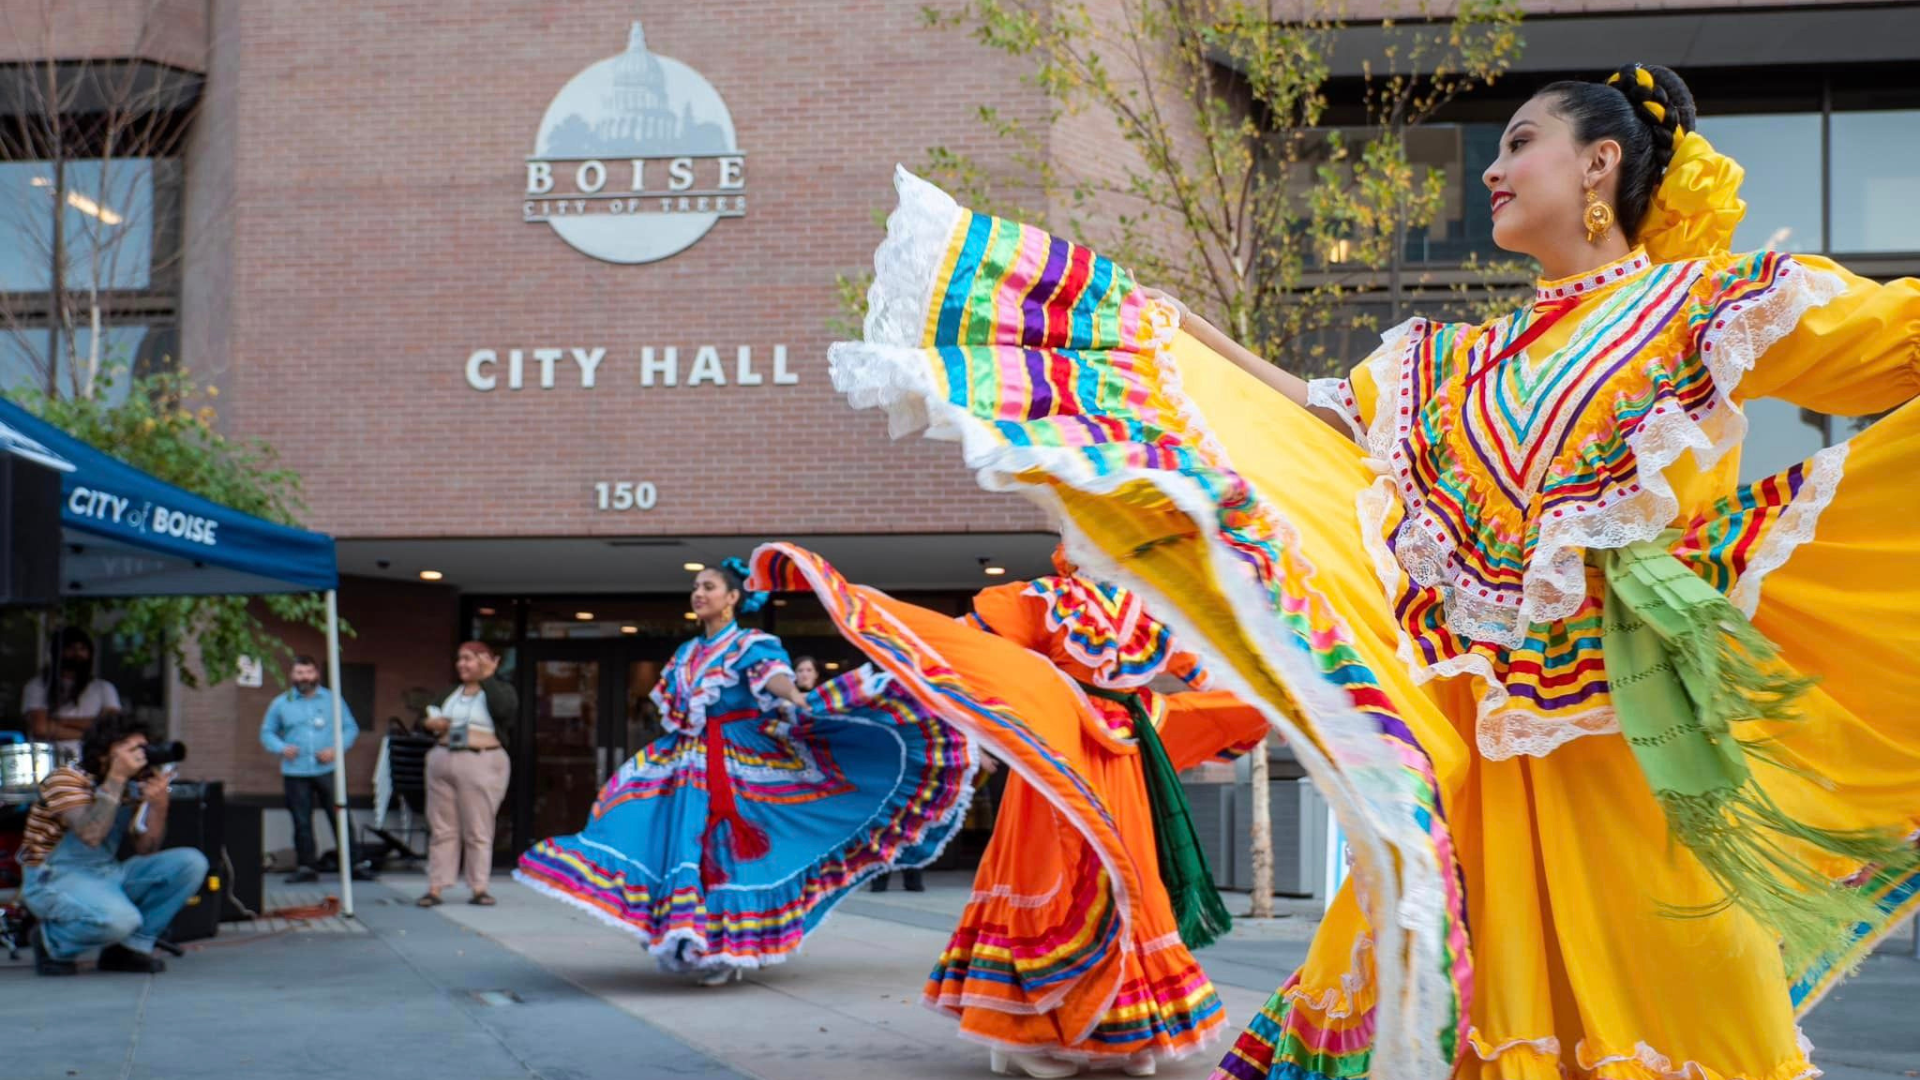 Ballet Folklorico Mexico Lindo Performing In Front of Boise City Hall